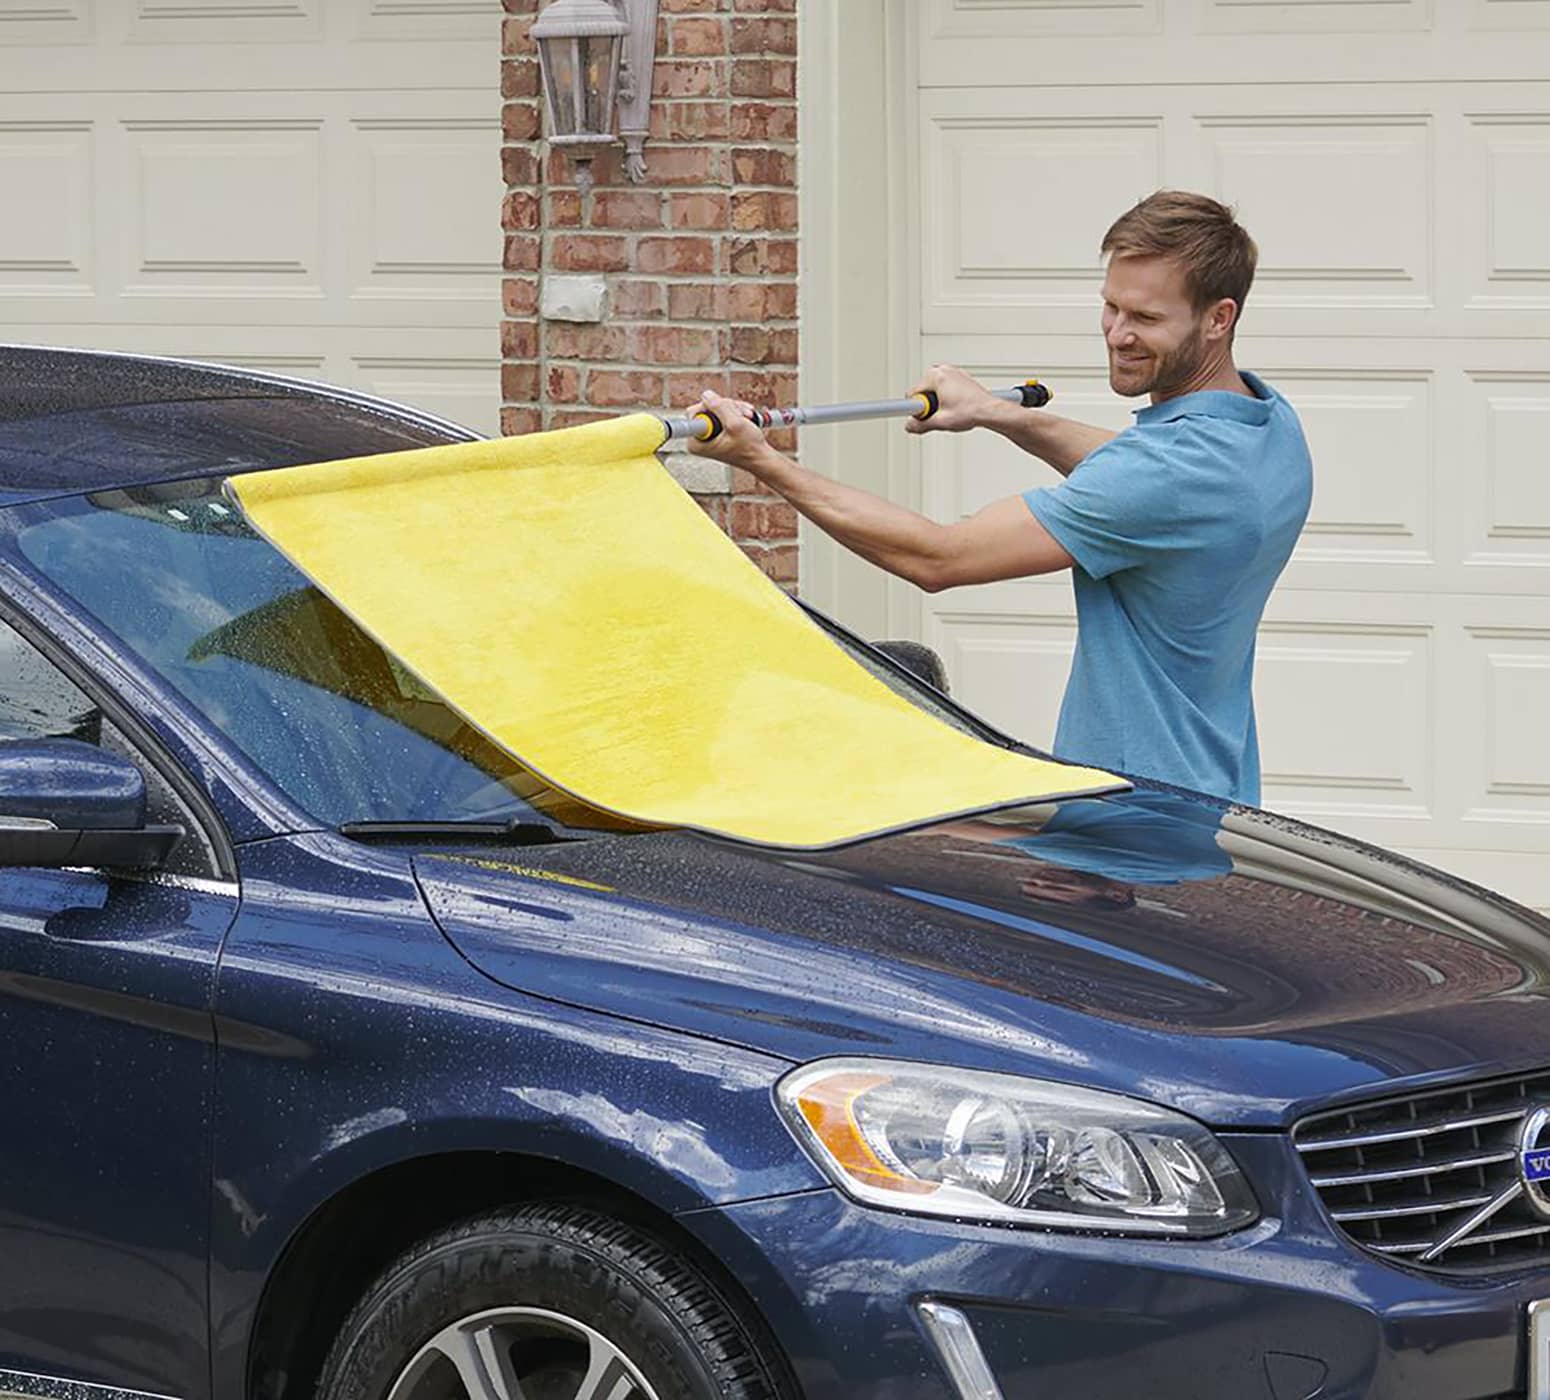 Oversized Long Reach Microfiber Towel - Dry a Wet Vehicle in 60 Seconds!